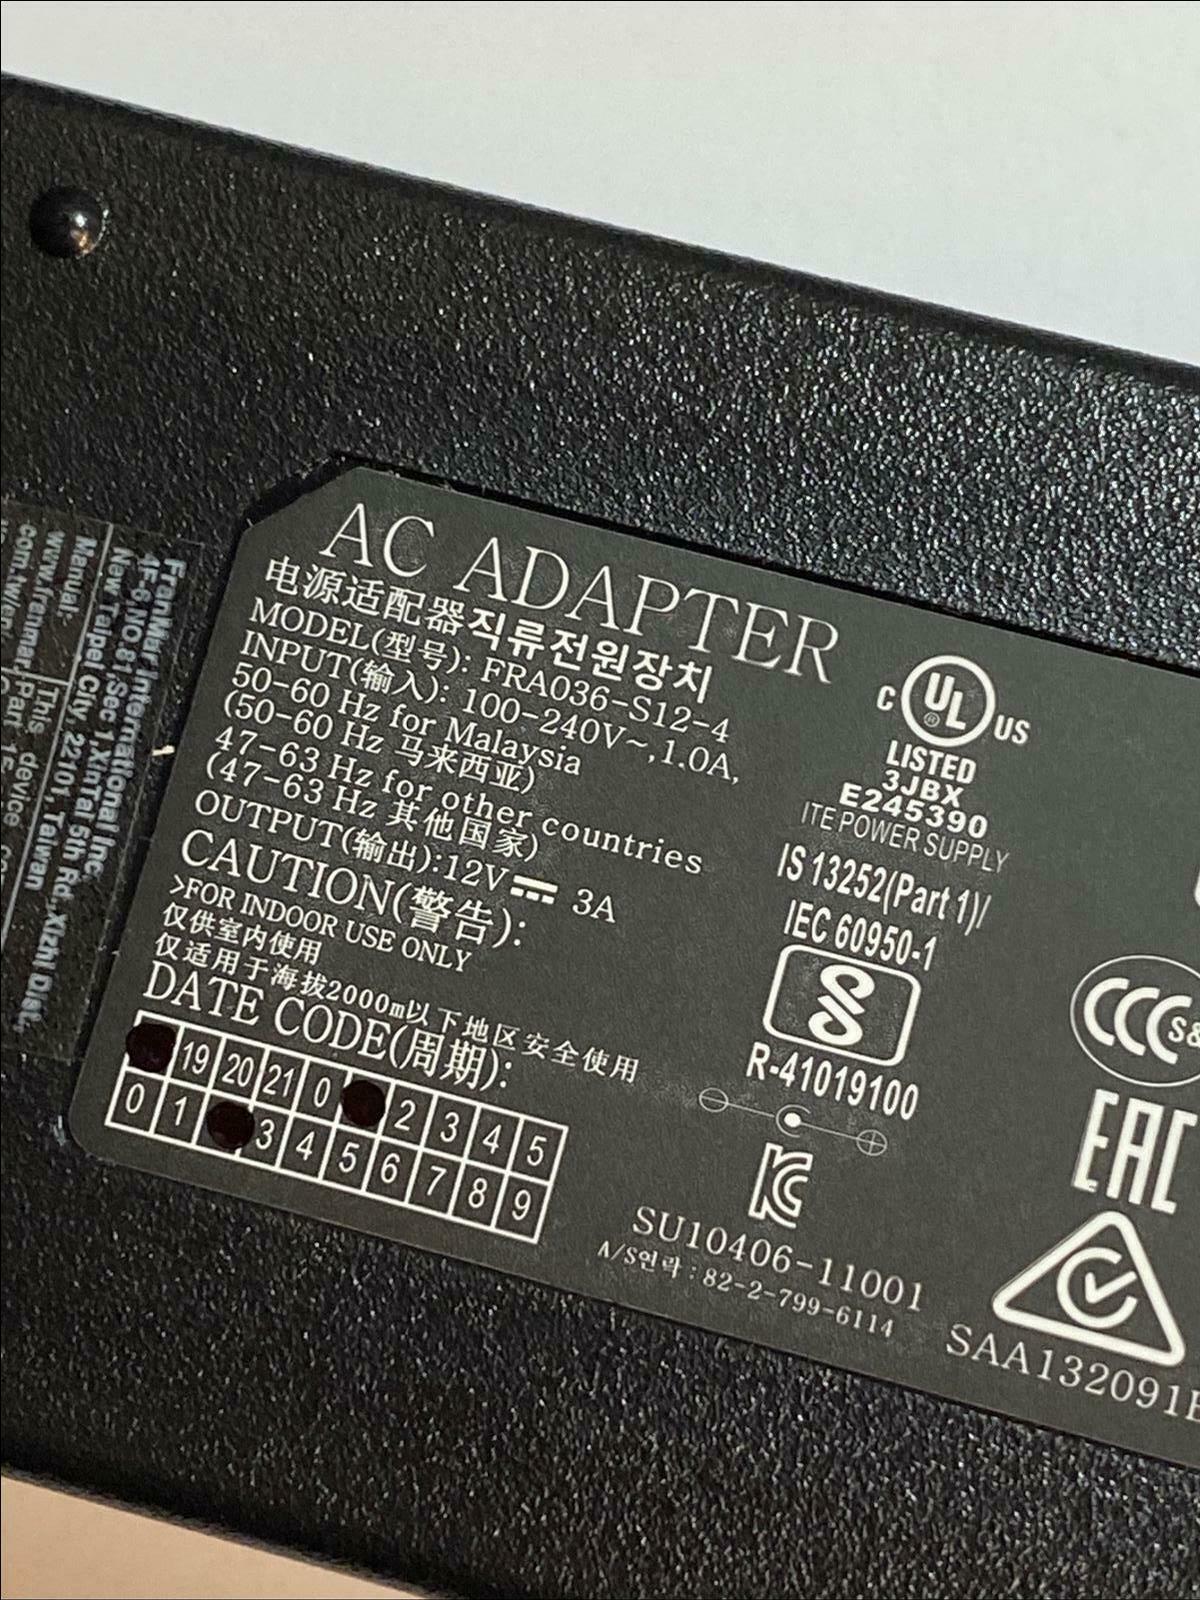 Replacement for 12V 3A LINEARITY1 ELECTRONICS Power ADAPTER MODEL LAD6019AB4 Type: Power Adapter Max. Output Power: